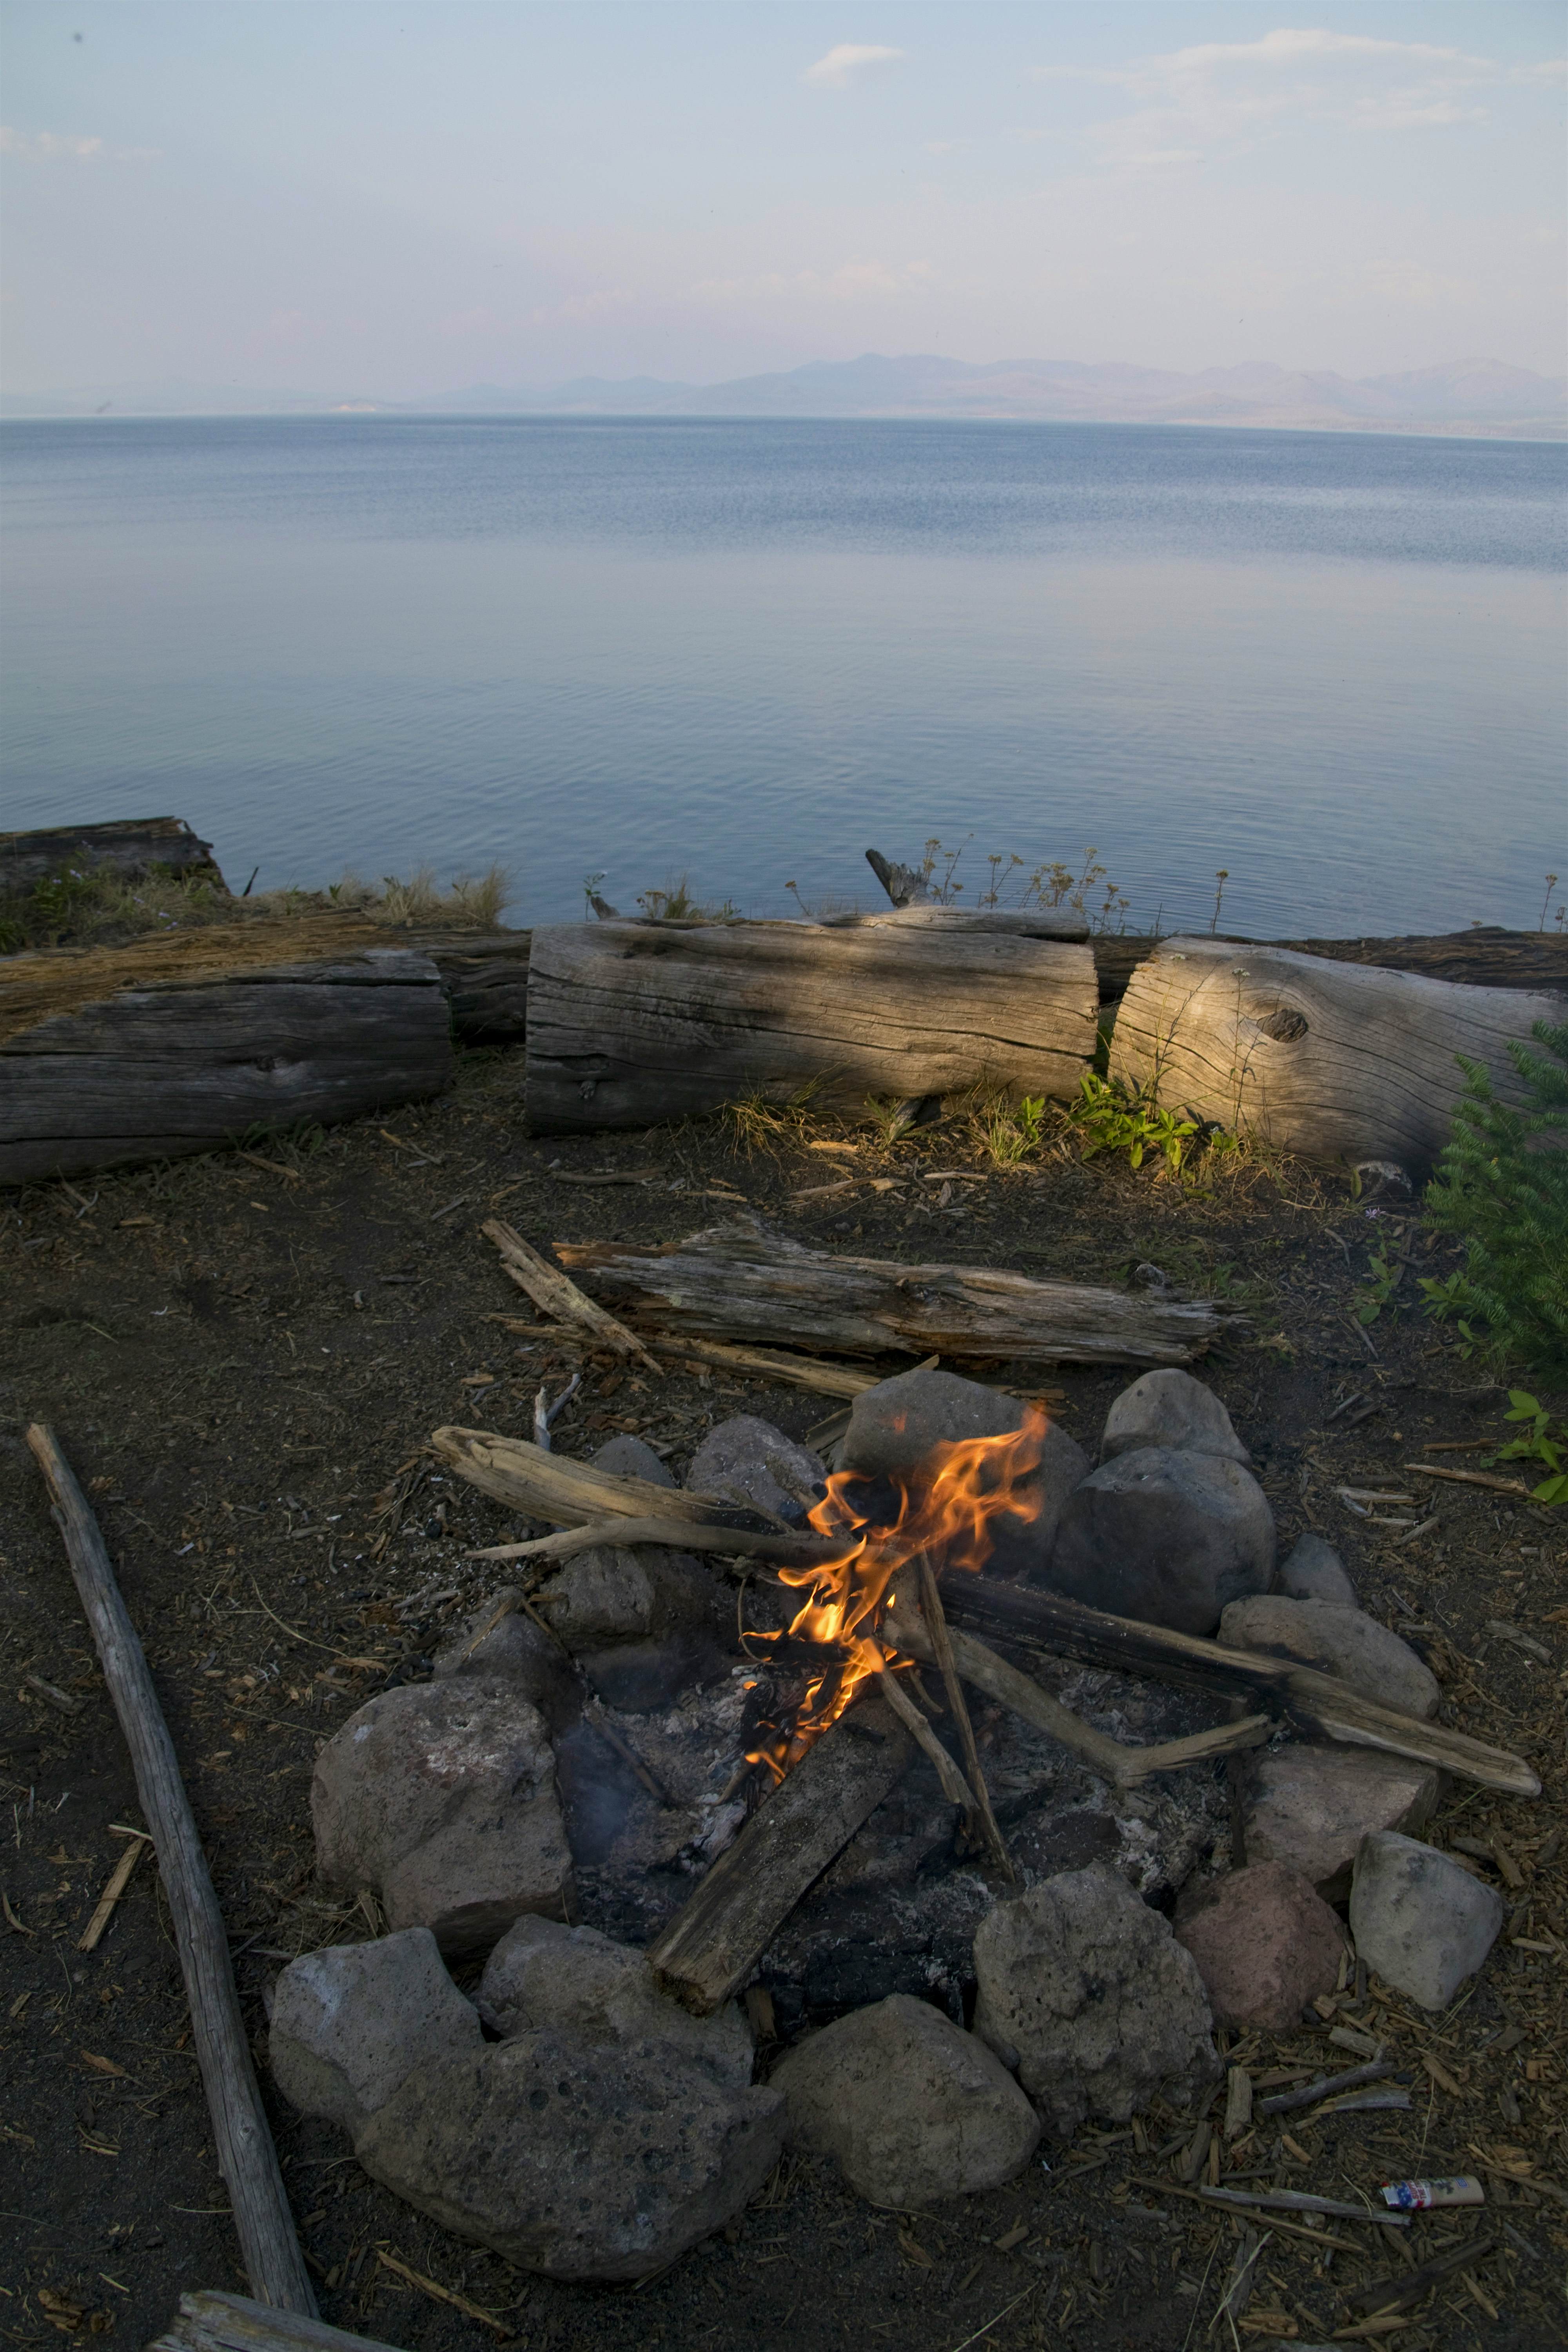 An open fire at a campsite in Yellowstone National Park, near a lake suitable for paddling